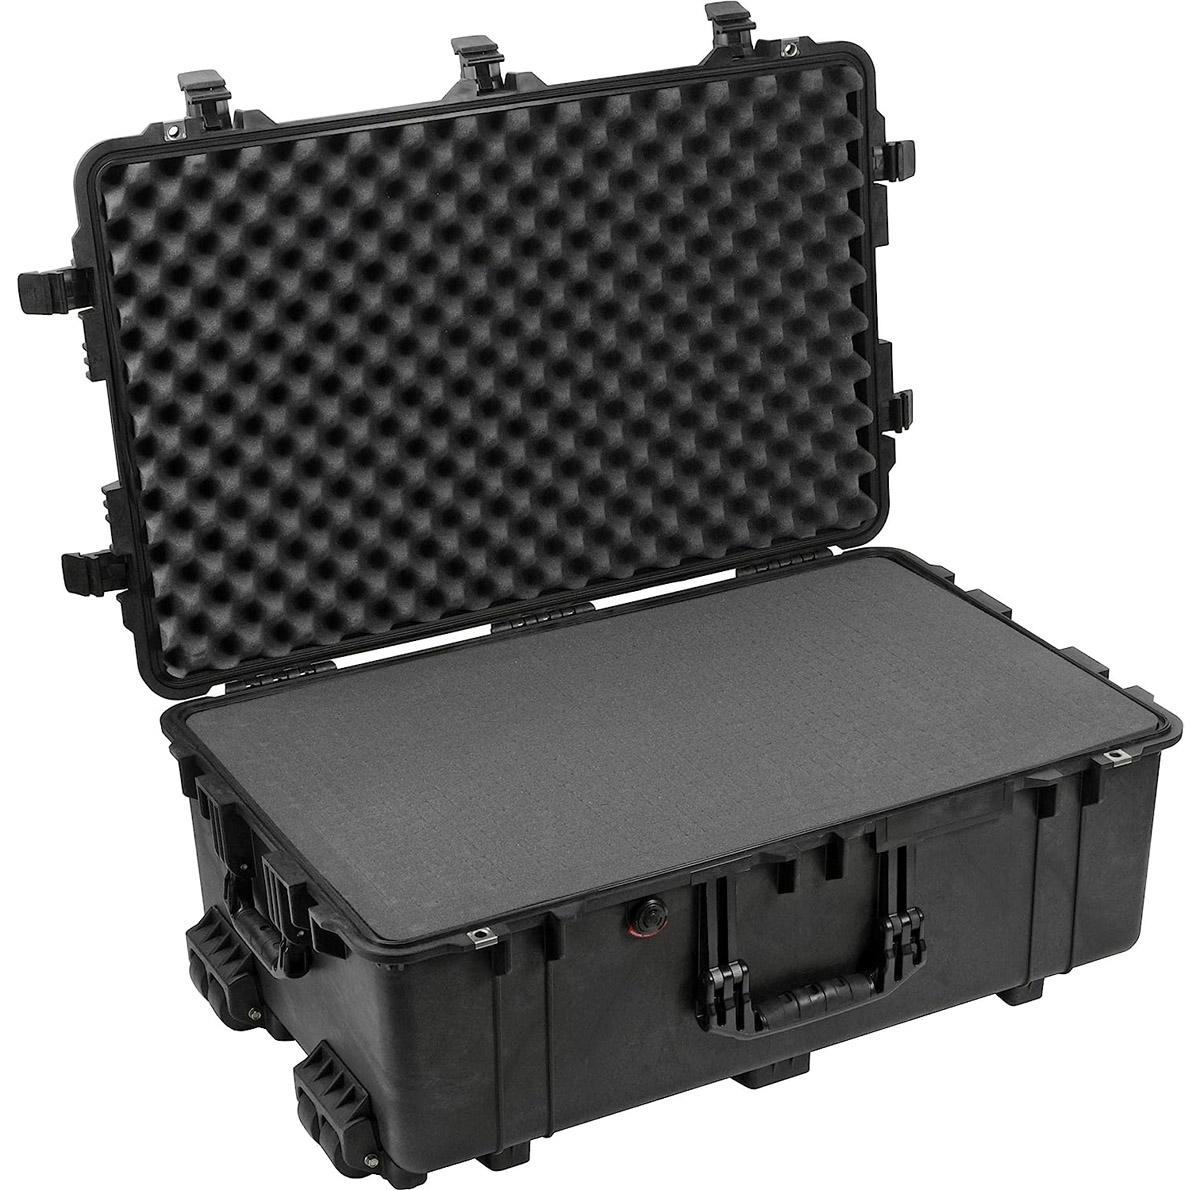 Pelican 1650 Camera Case With Foam for $254.99 Shipped